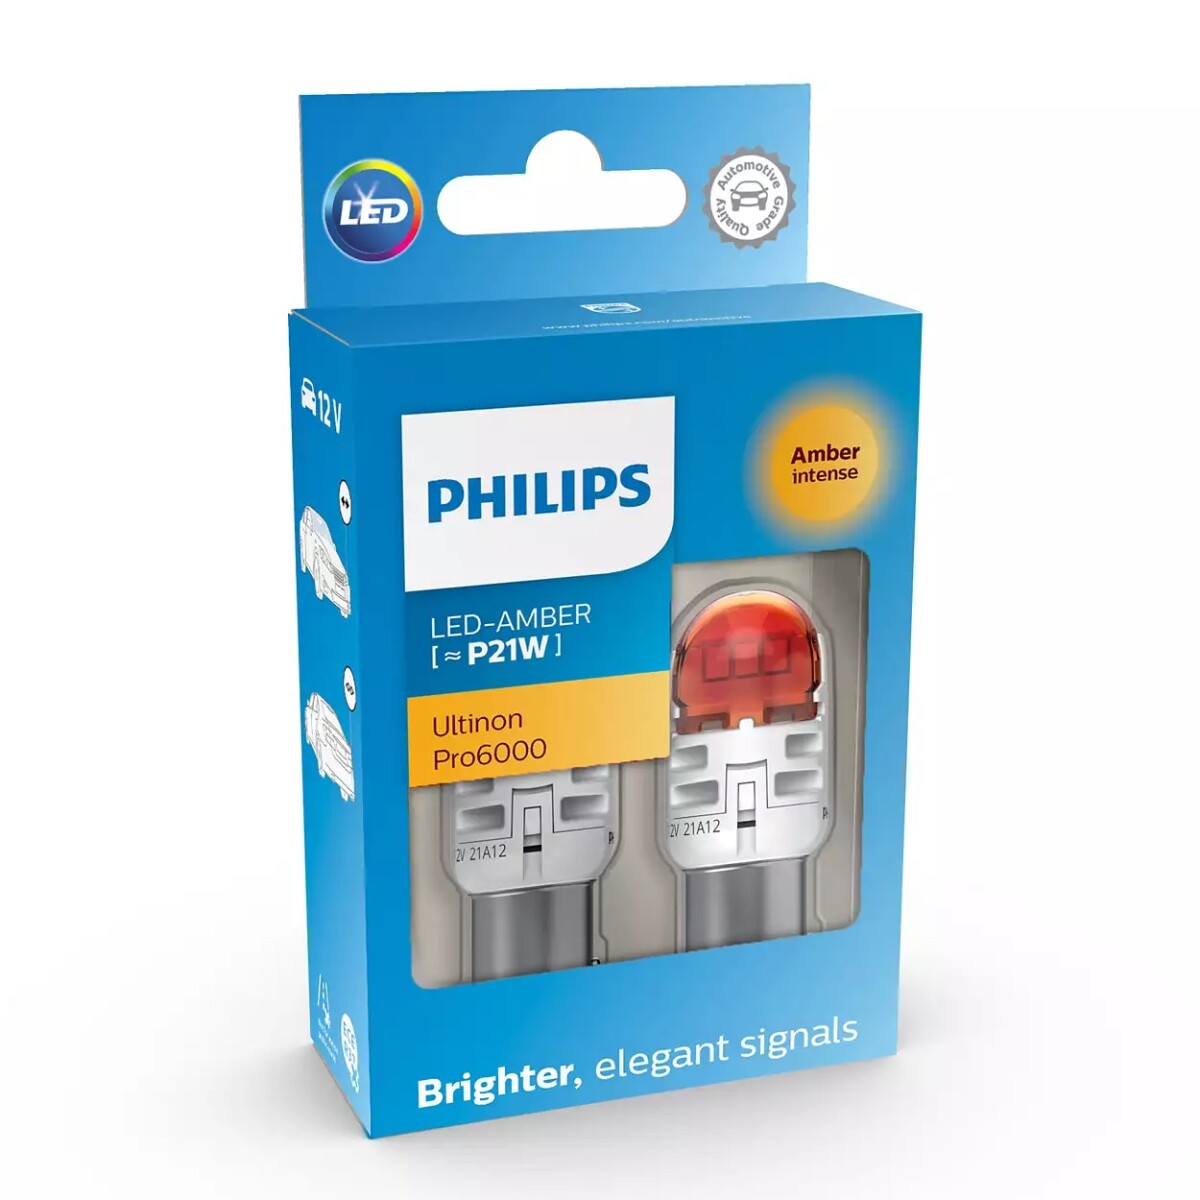 https://www.autolampen24.ch/media/image/product/1504/lg/led-p21w-12v-23w-ultinon-pro6000-si-amber-intense-noece-2st-philips.jpg